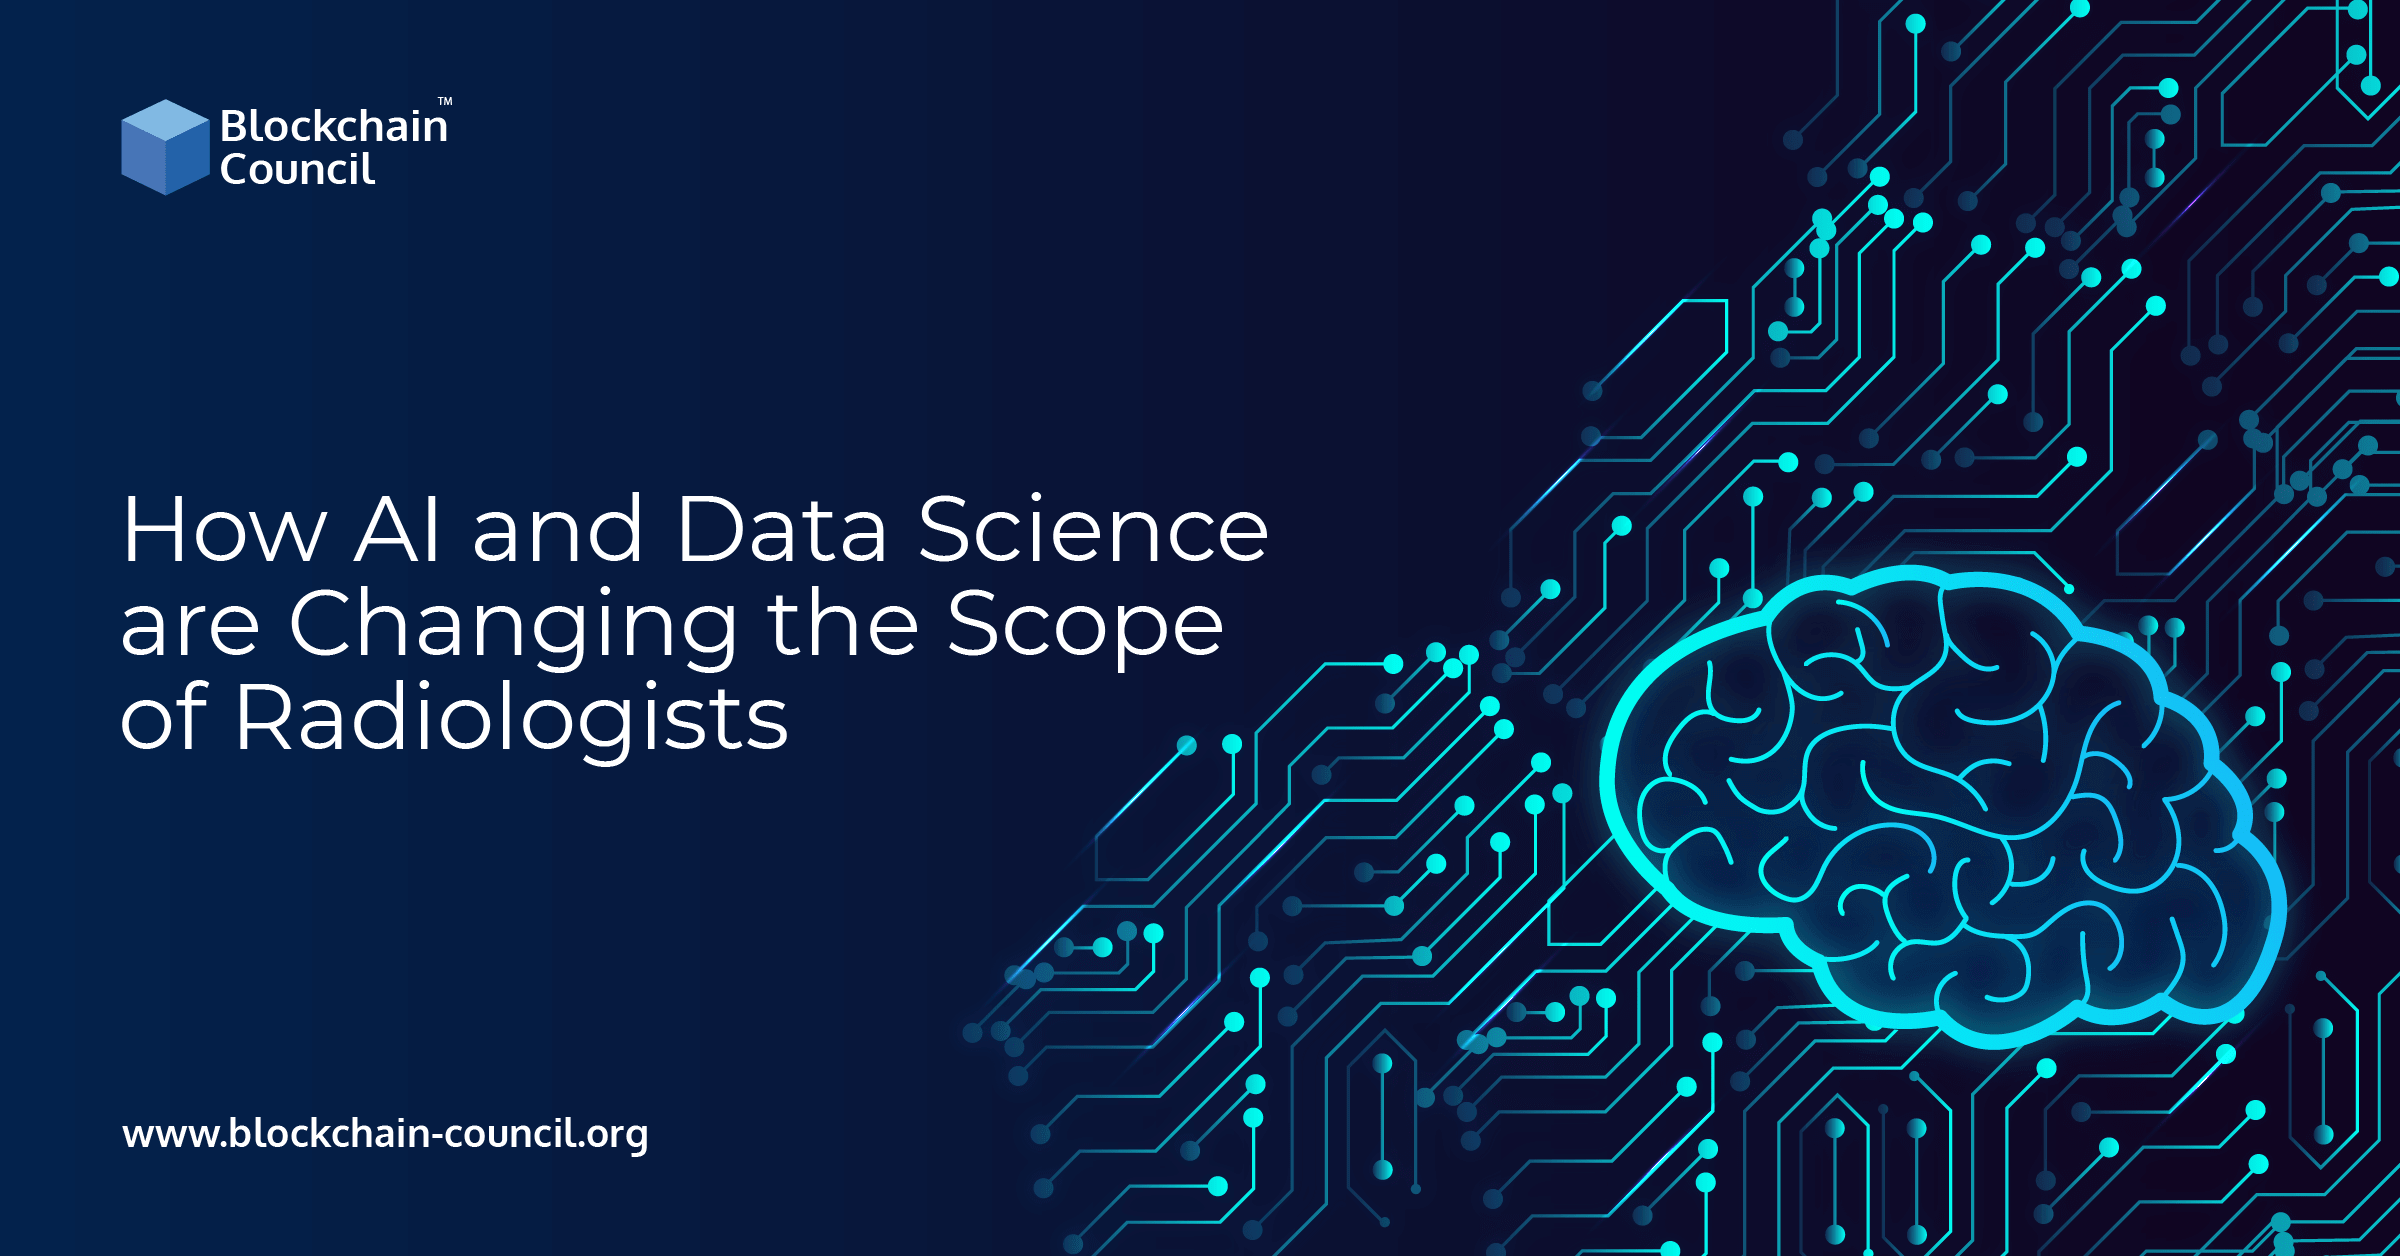 How AI and Data Science are Changing the Scope of Radiologists